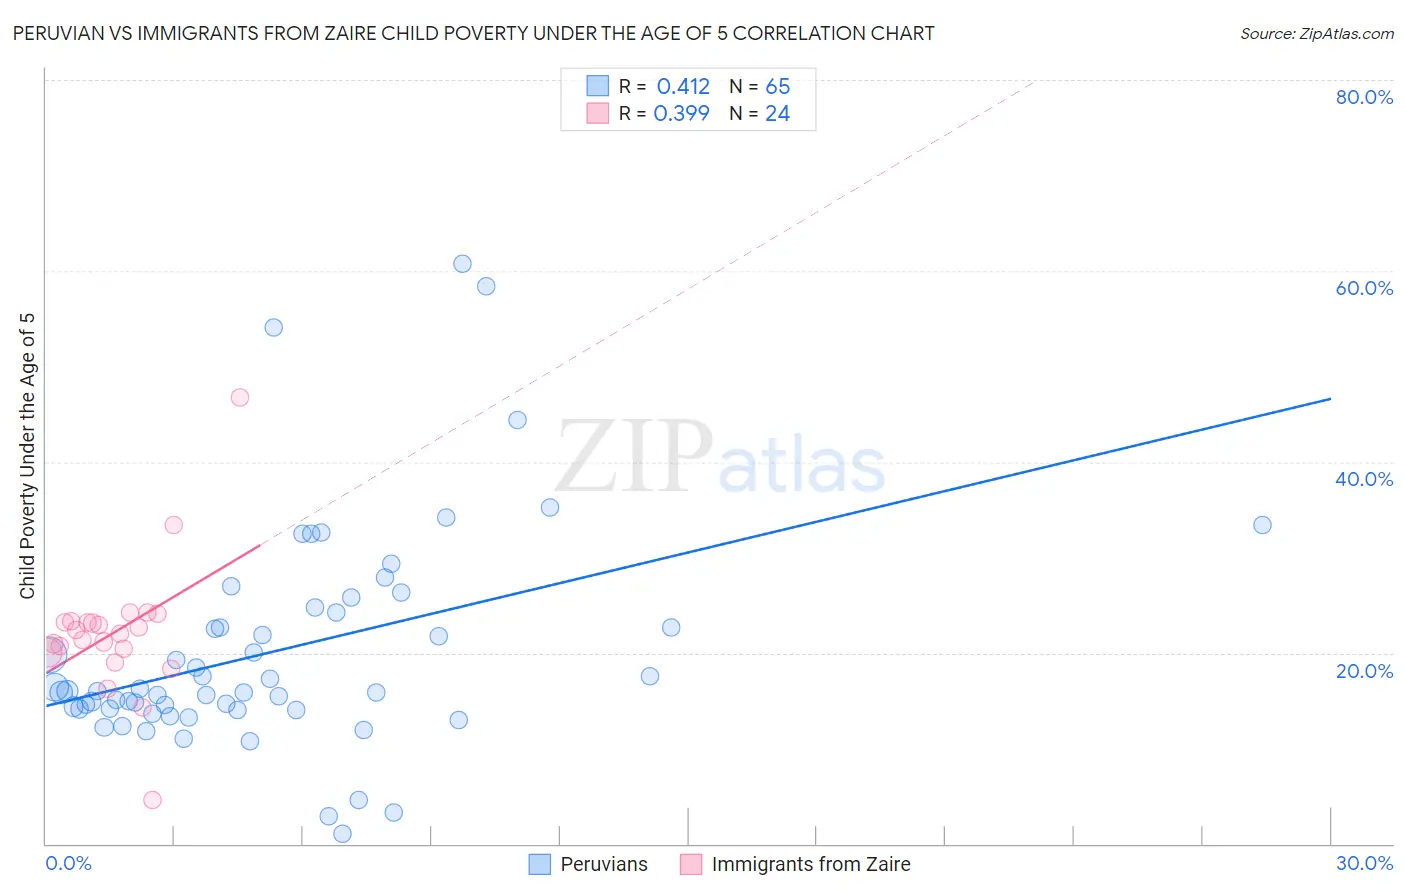 Peruvian vs Immigrants from Zaire Child Poverty Under the Age of 5